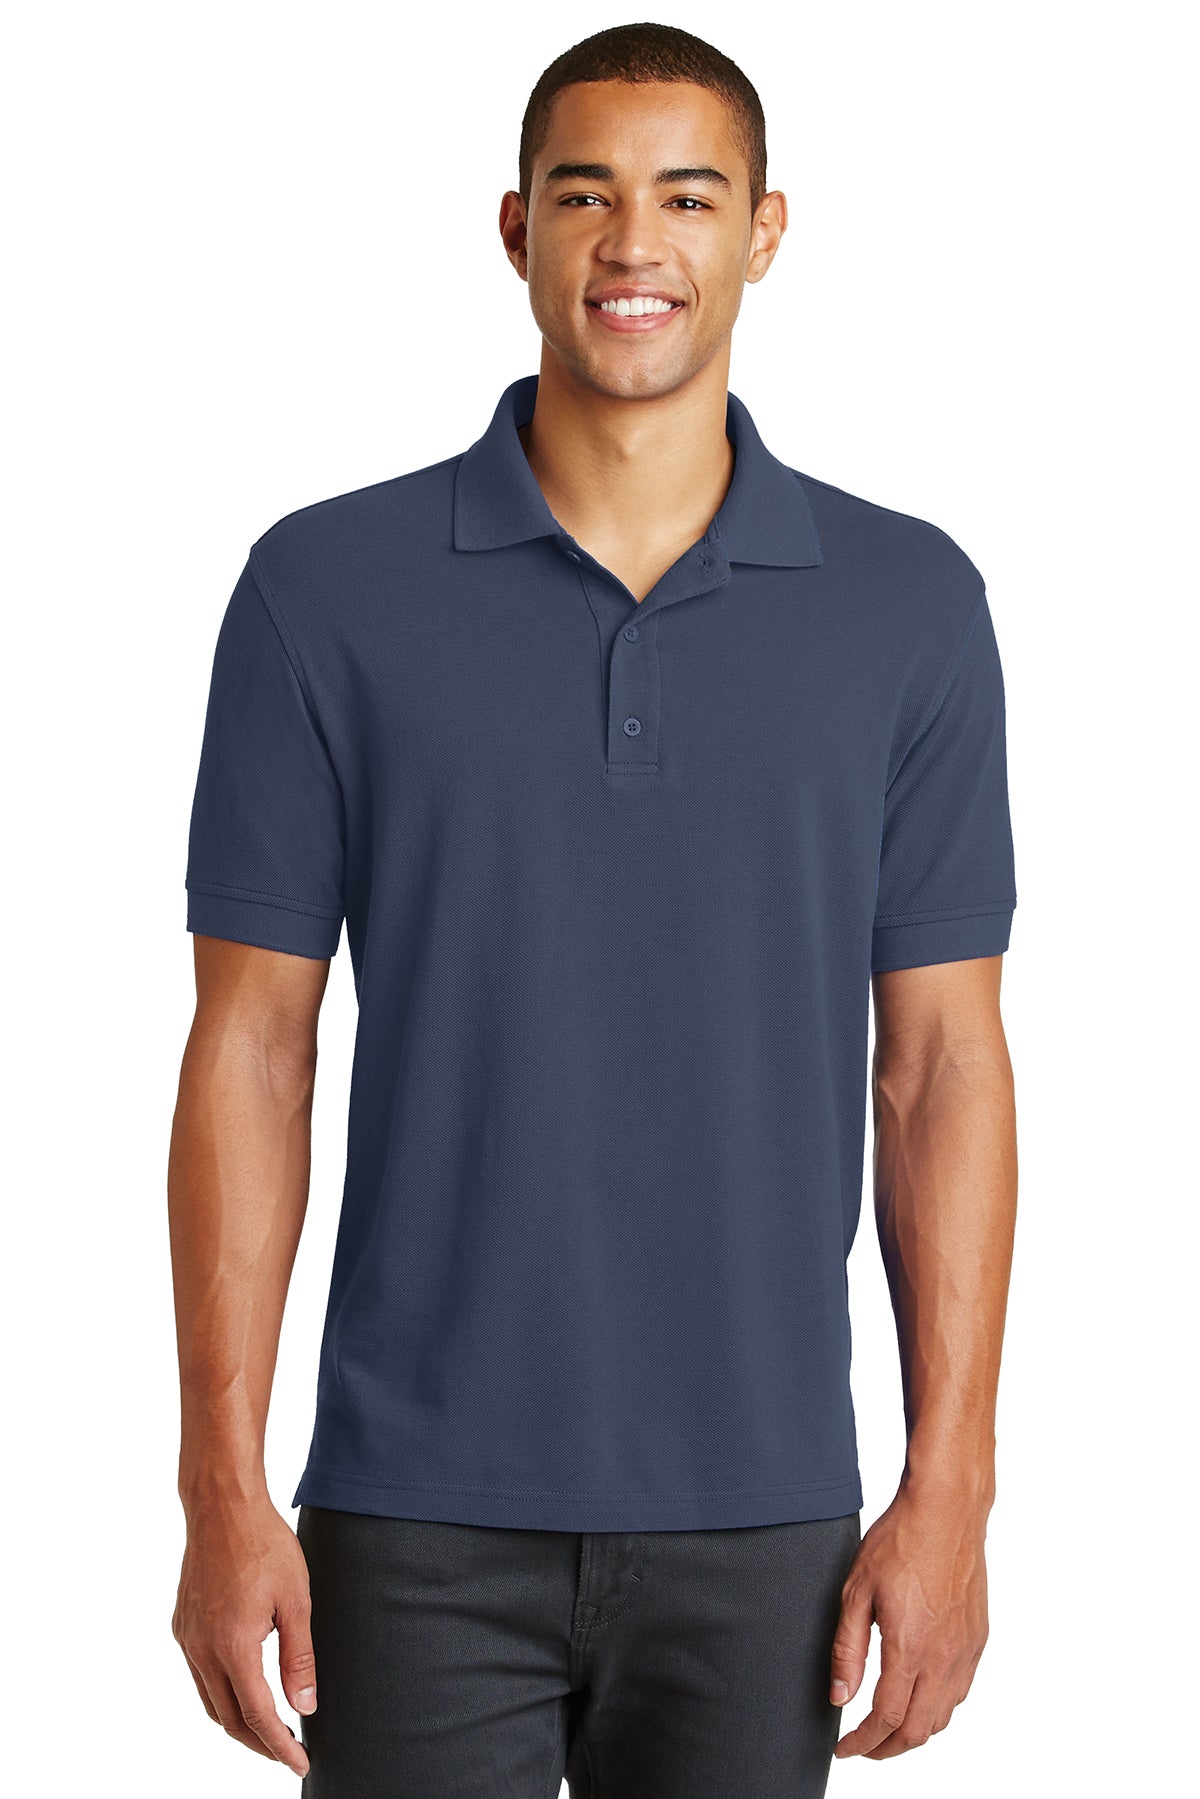 LL Two Oars (Embroidered) Eddie Bauer Golf Polo